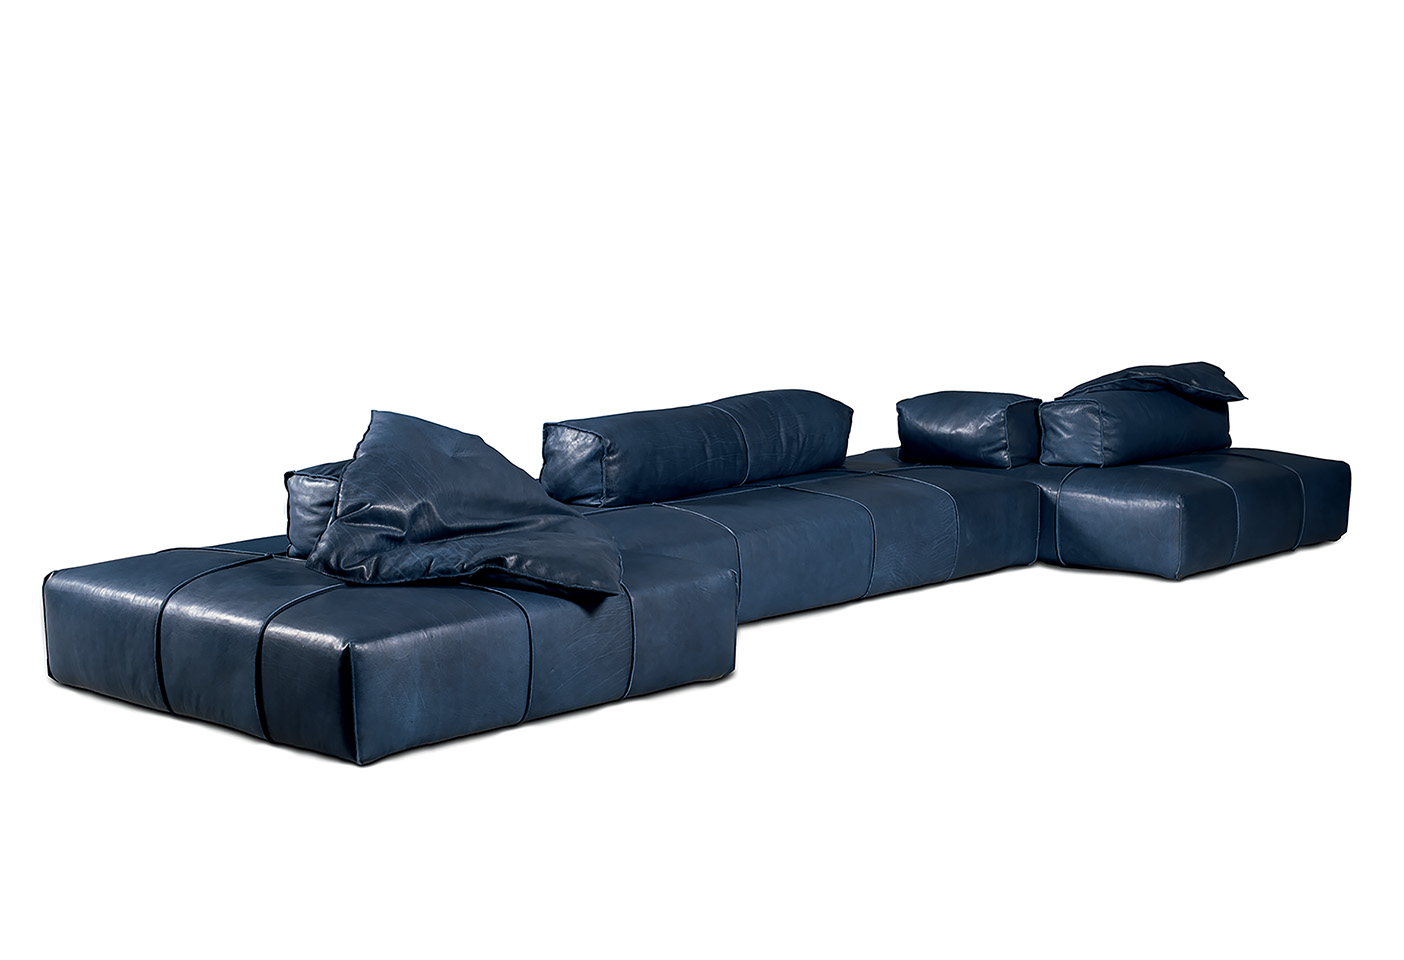 The leather Panama Bold sofa designed by Paola Navone for Baxter. Photo c/o Baxter. 